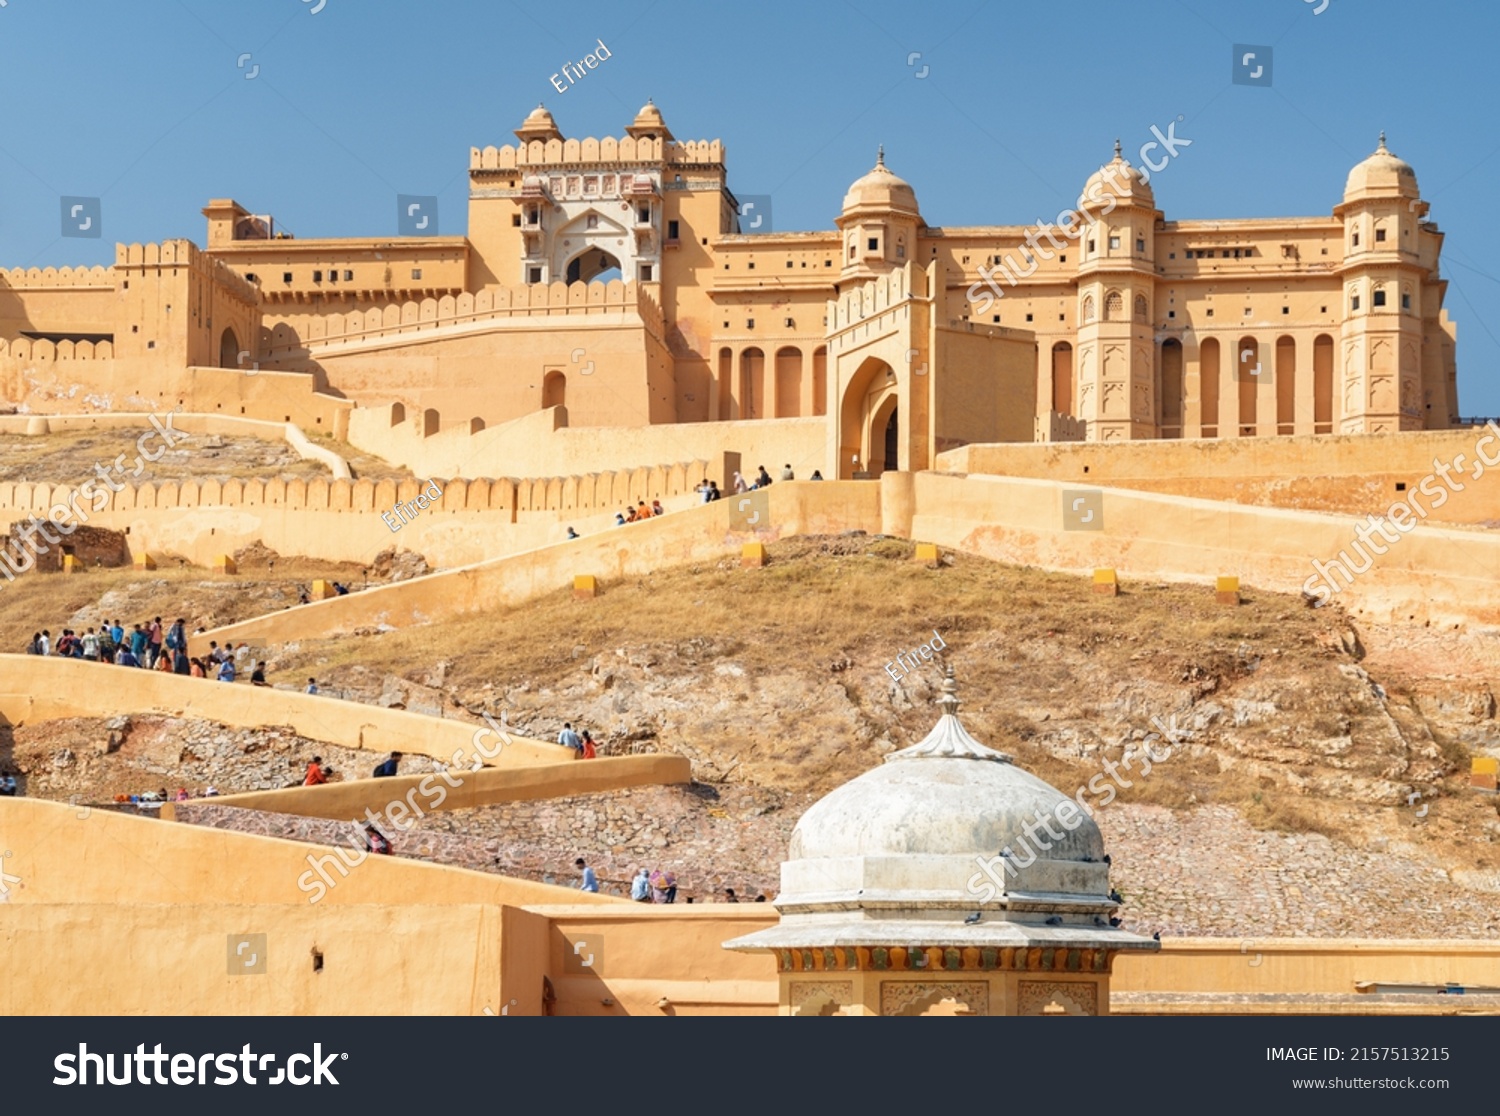 Gorgeous view of the Amer Fort and Palace (Amber Fort) on blue sky background in Jaipur, Rajasthan, India. Rajput military hill architecture. Jaipur is a popular tourist destination of South Asia. #2157513215